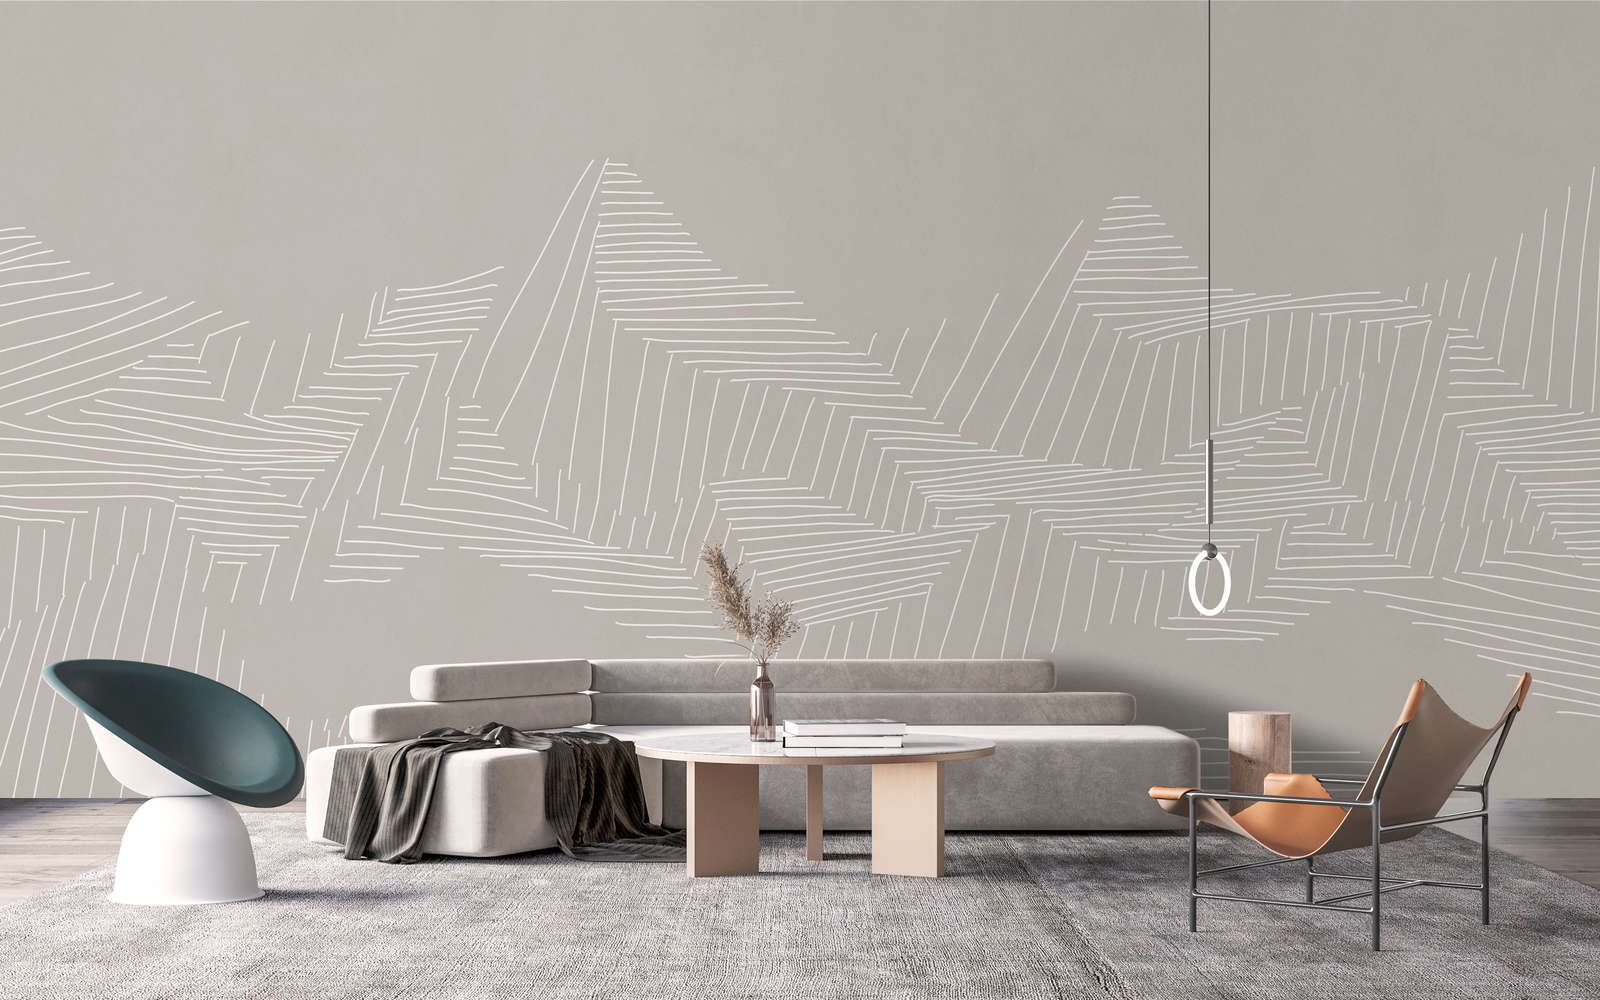             Photo wallpaper »victor« - Mountain landscape with line pattern - Grey | Smooth, slightly pearly shimmering non-woven fabric
        